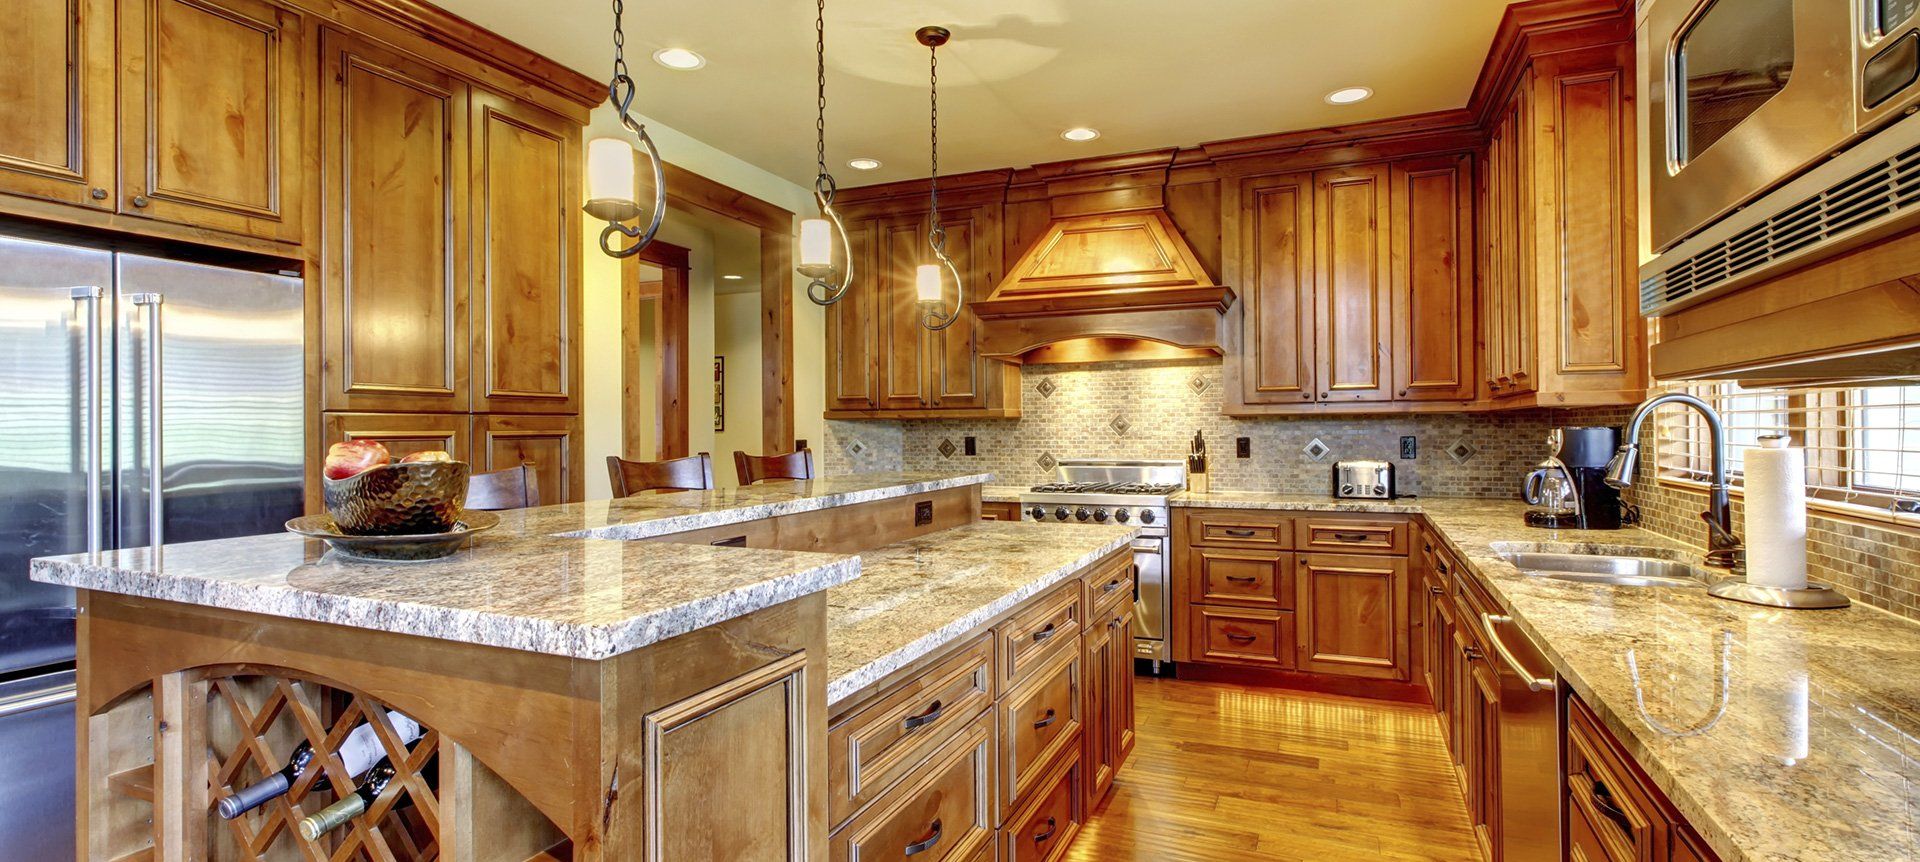 kitchen remodeled by Ener-G Tech, Inc.